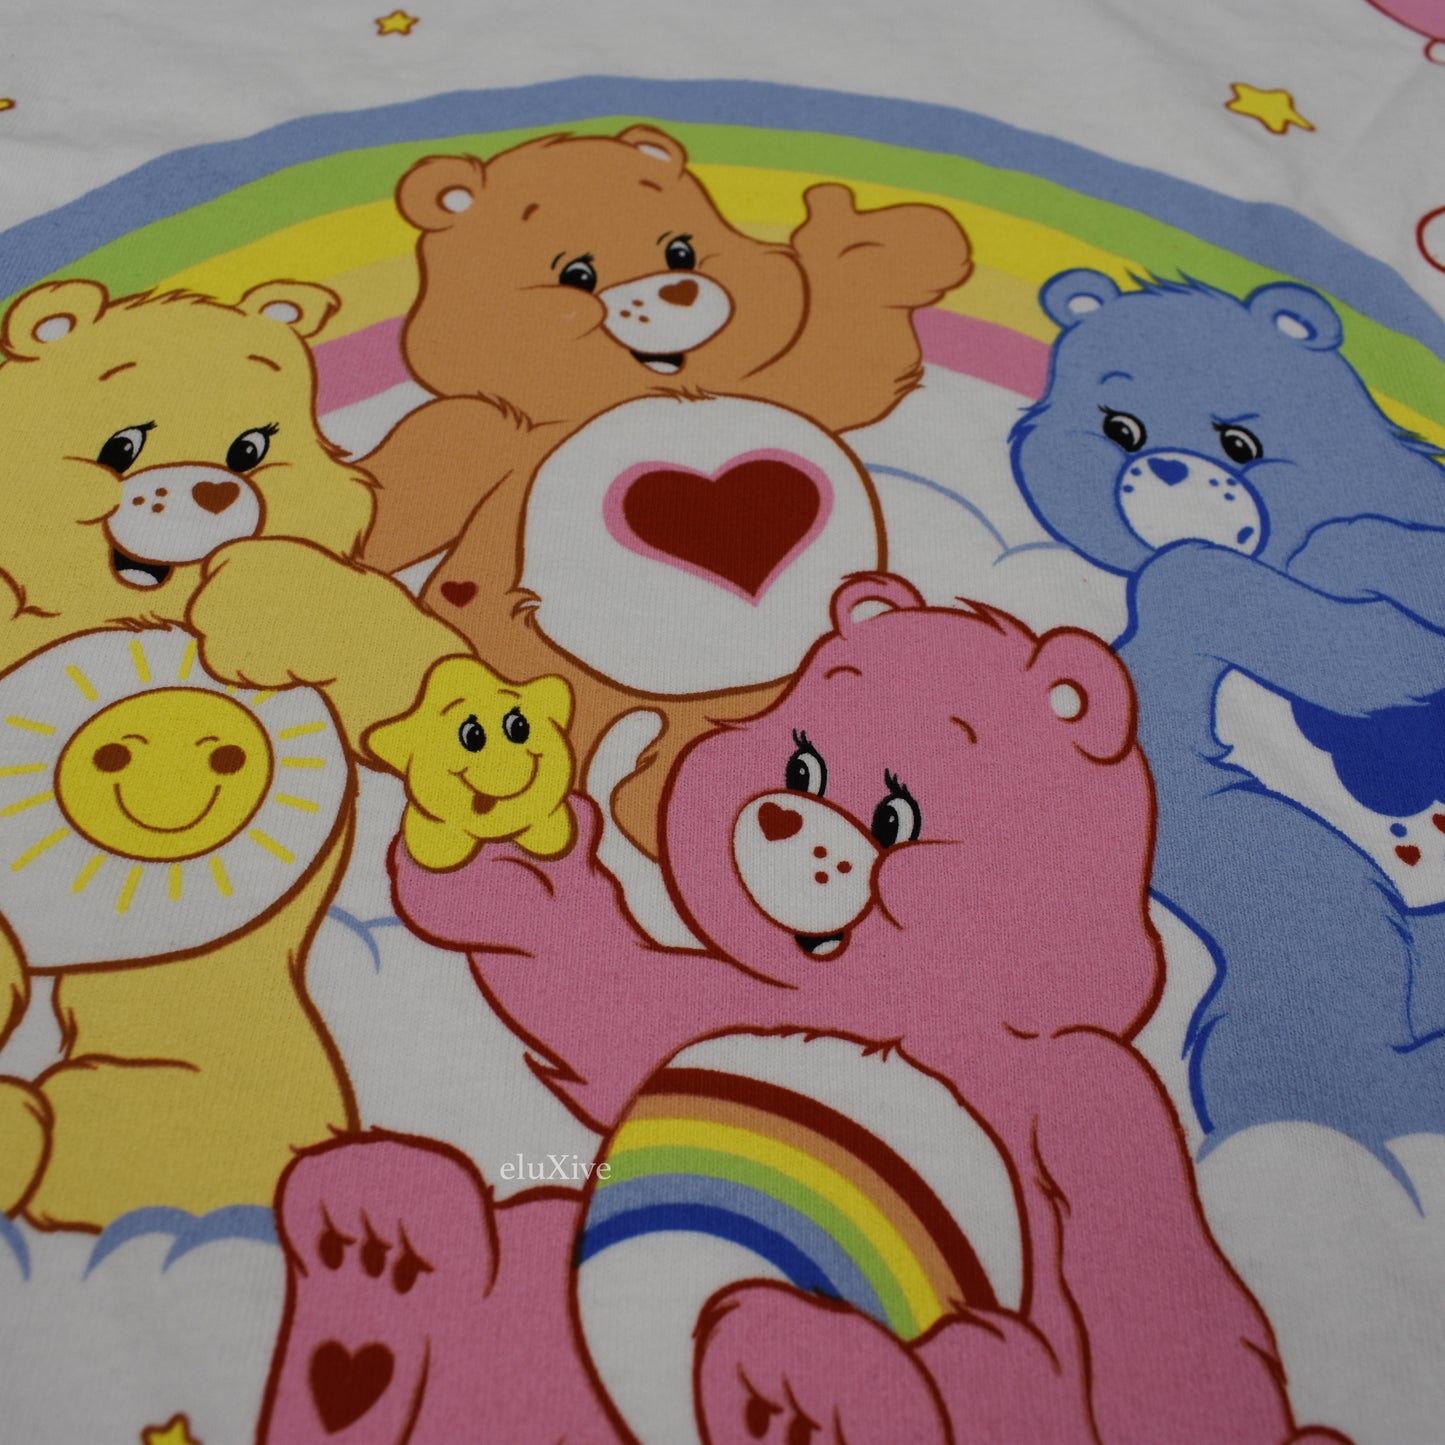 Mega Yacht - Sharing Is Caring 'Coco Chanel' Care Bear T-Shirt